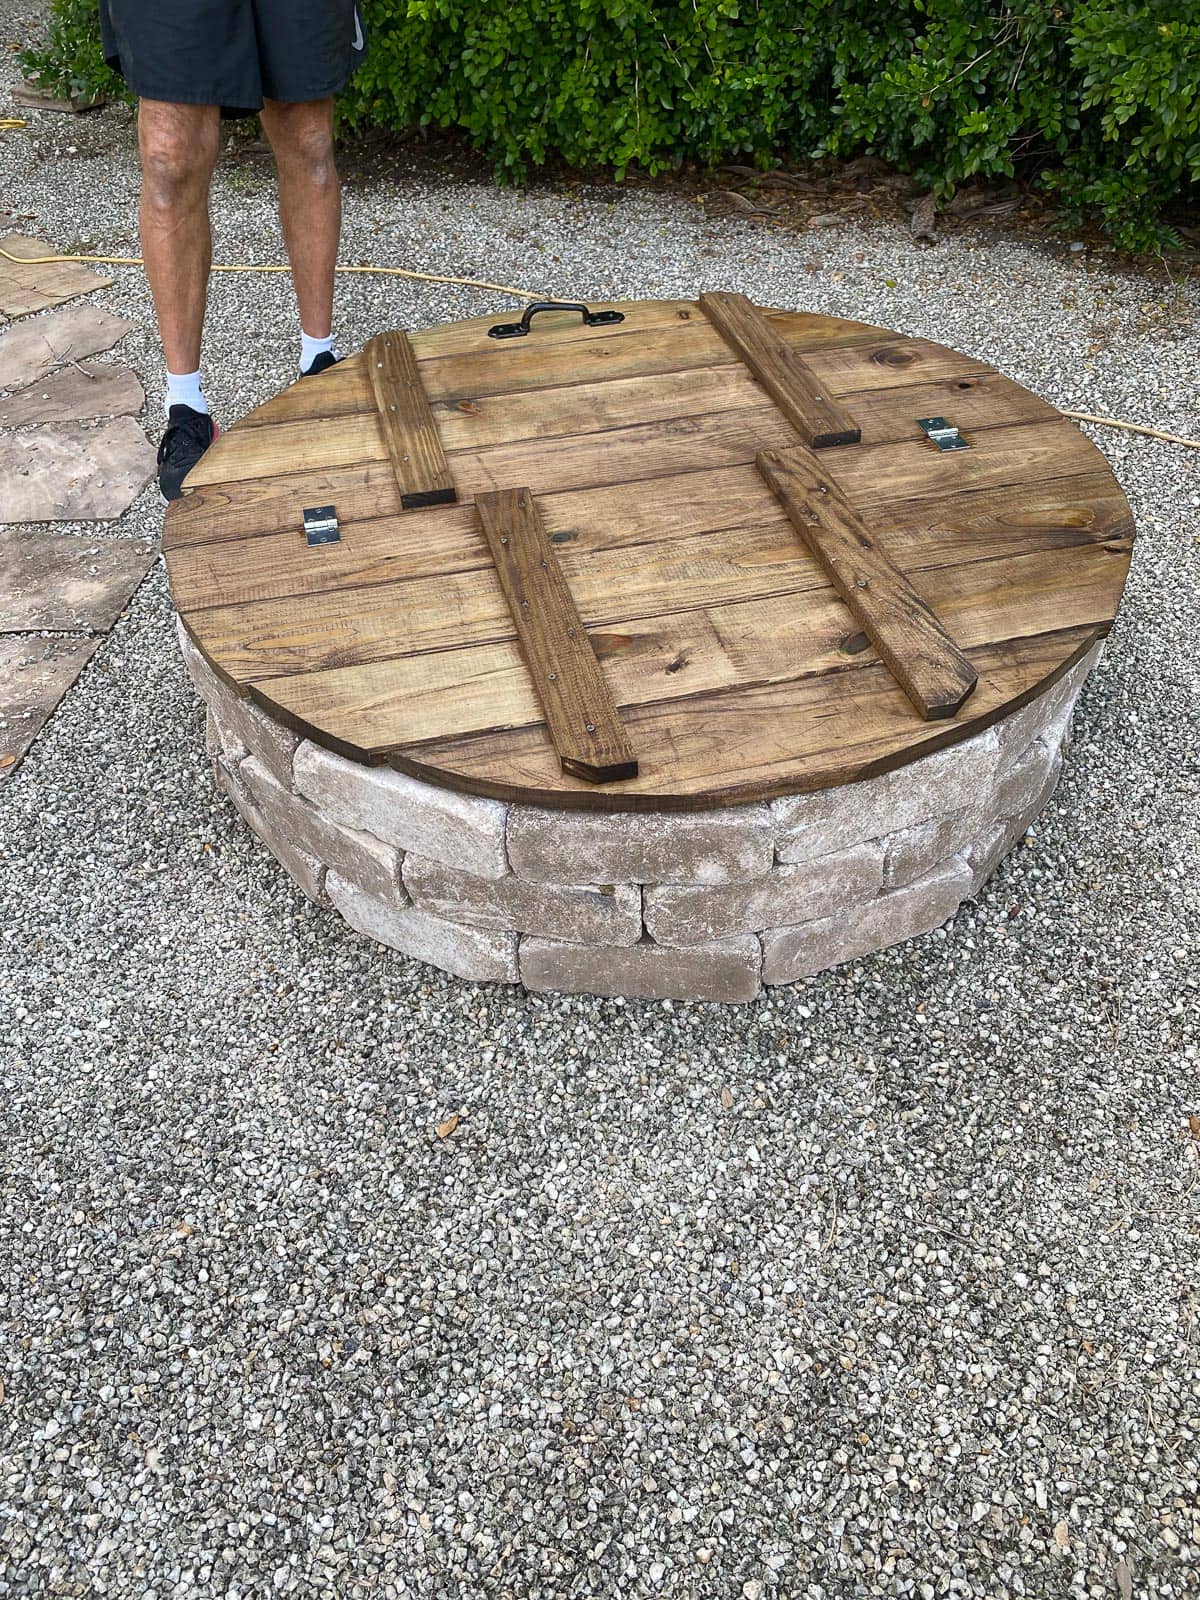 completed outdoor fire pit